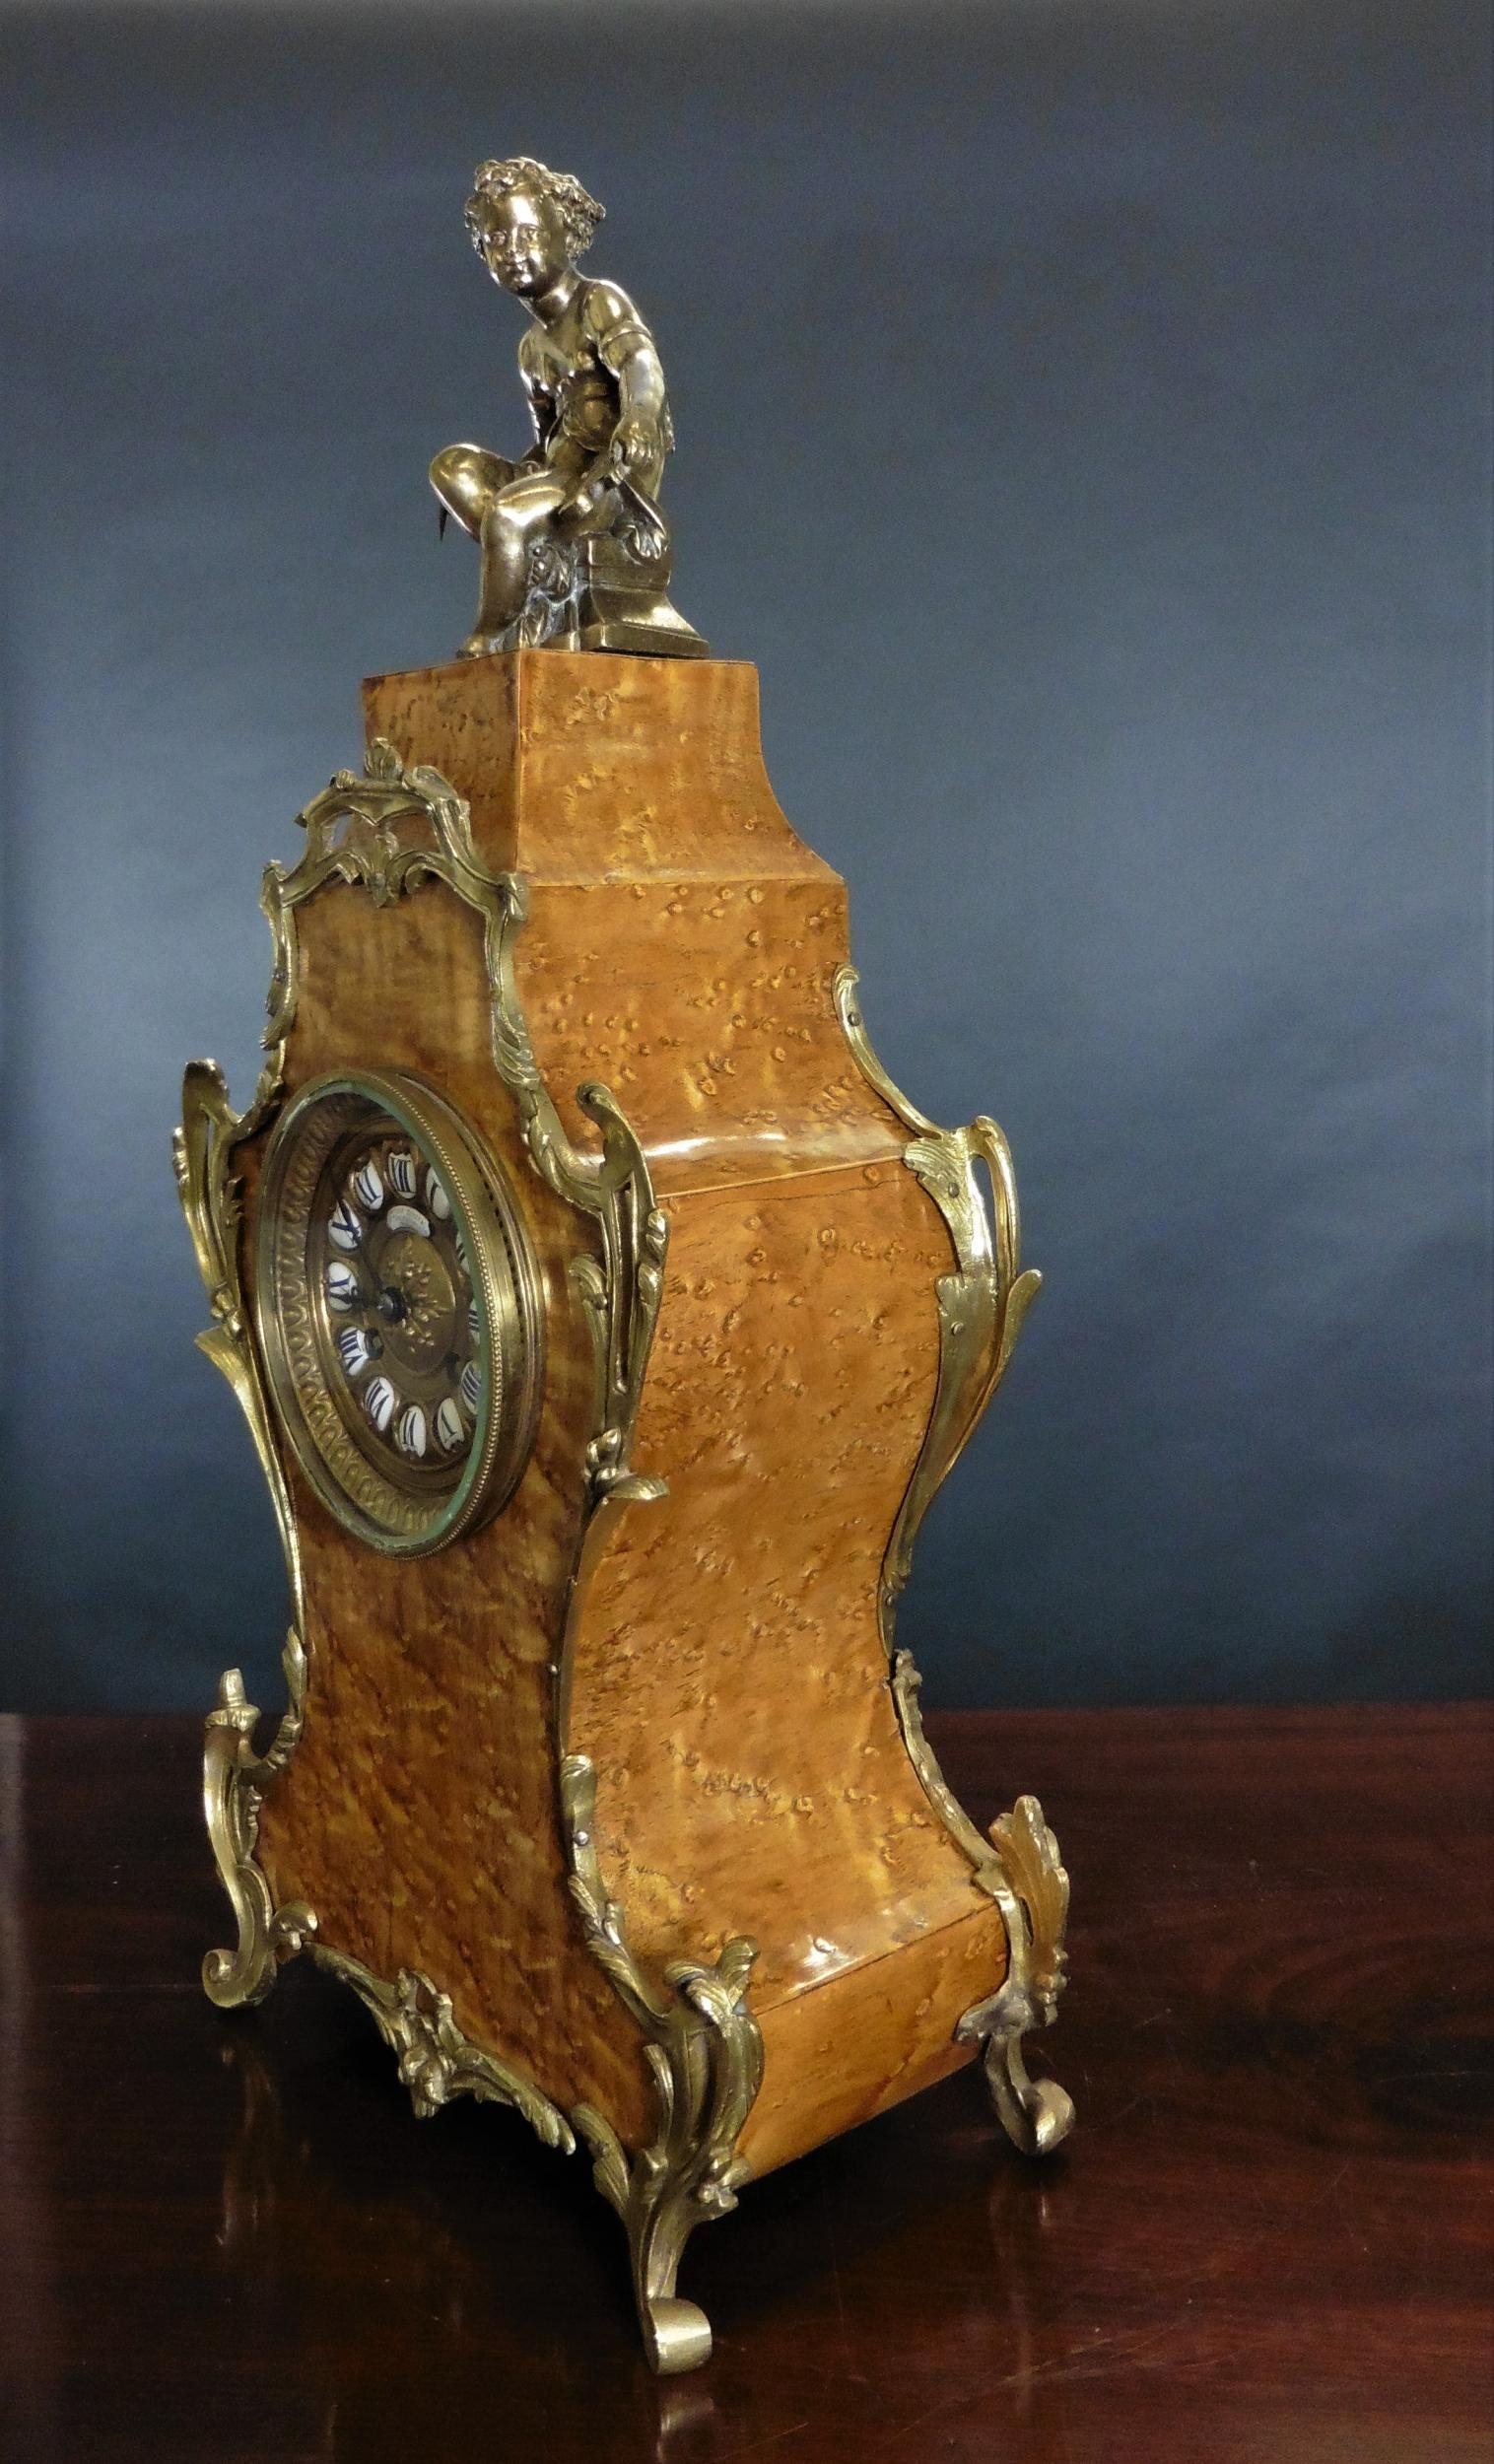 Outstanding Boulle clock in ‘Birds Eye’ maple with fine ormolu mounts standing on four outswept feet

Gilded dial signed Comptoir General, Paris with individual enamel Roman numerals and original ‘blued’ steel hands.

Eight day French movement